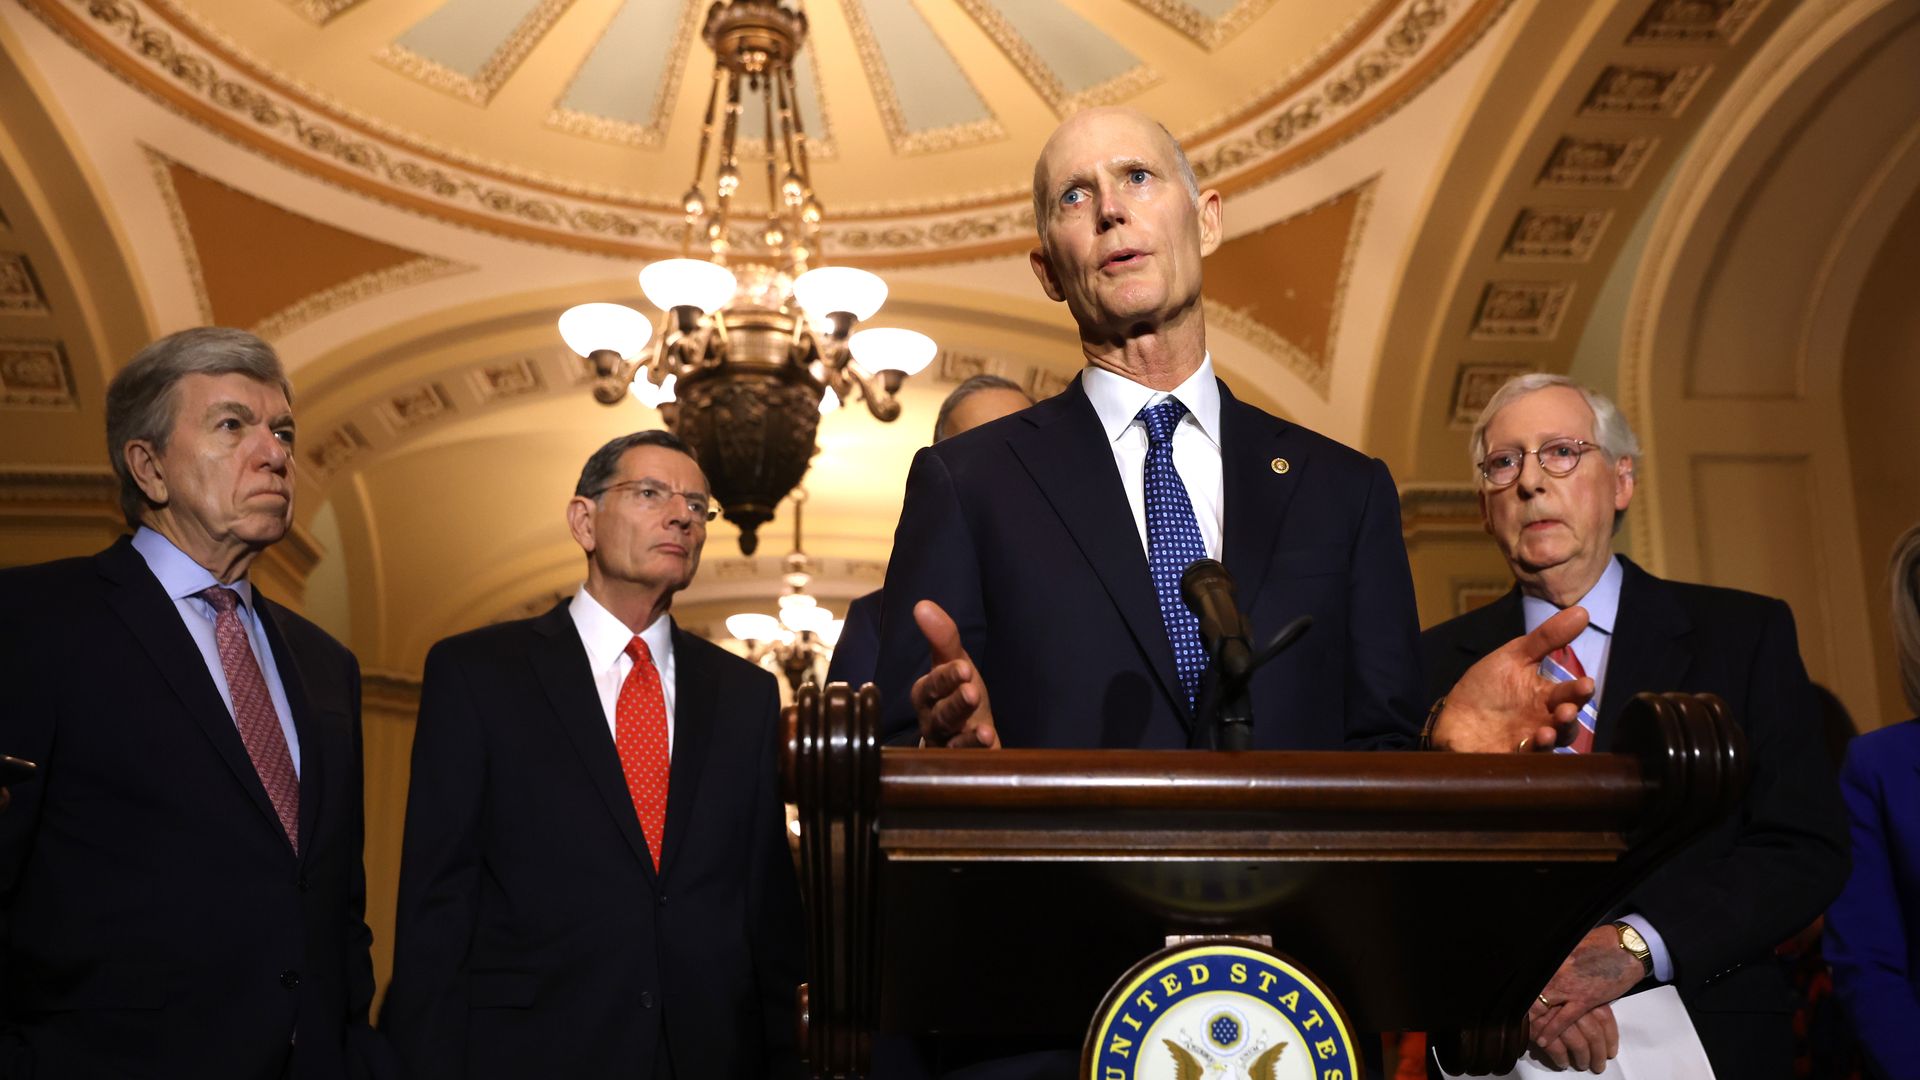 Sen. Rick Scott speaks at a GOP leadership press conference at the Capitol on March 1, flanked by Sens. Roy Blunt, John Barrasso and Mitch McConnell.